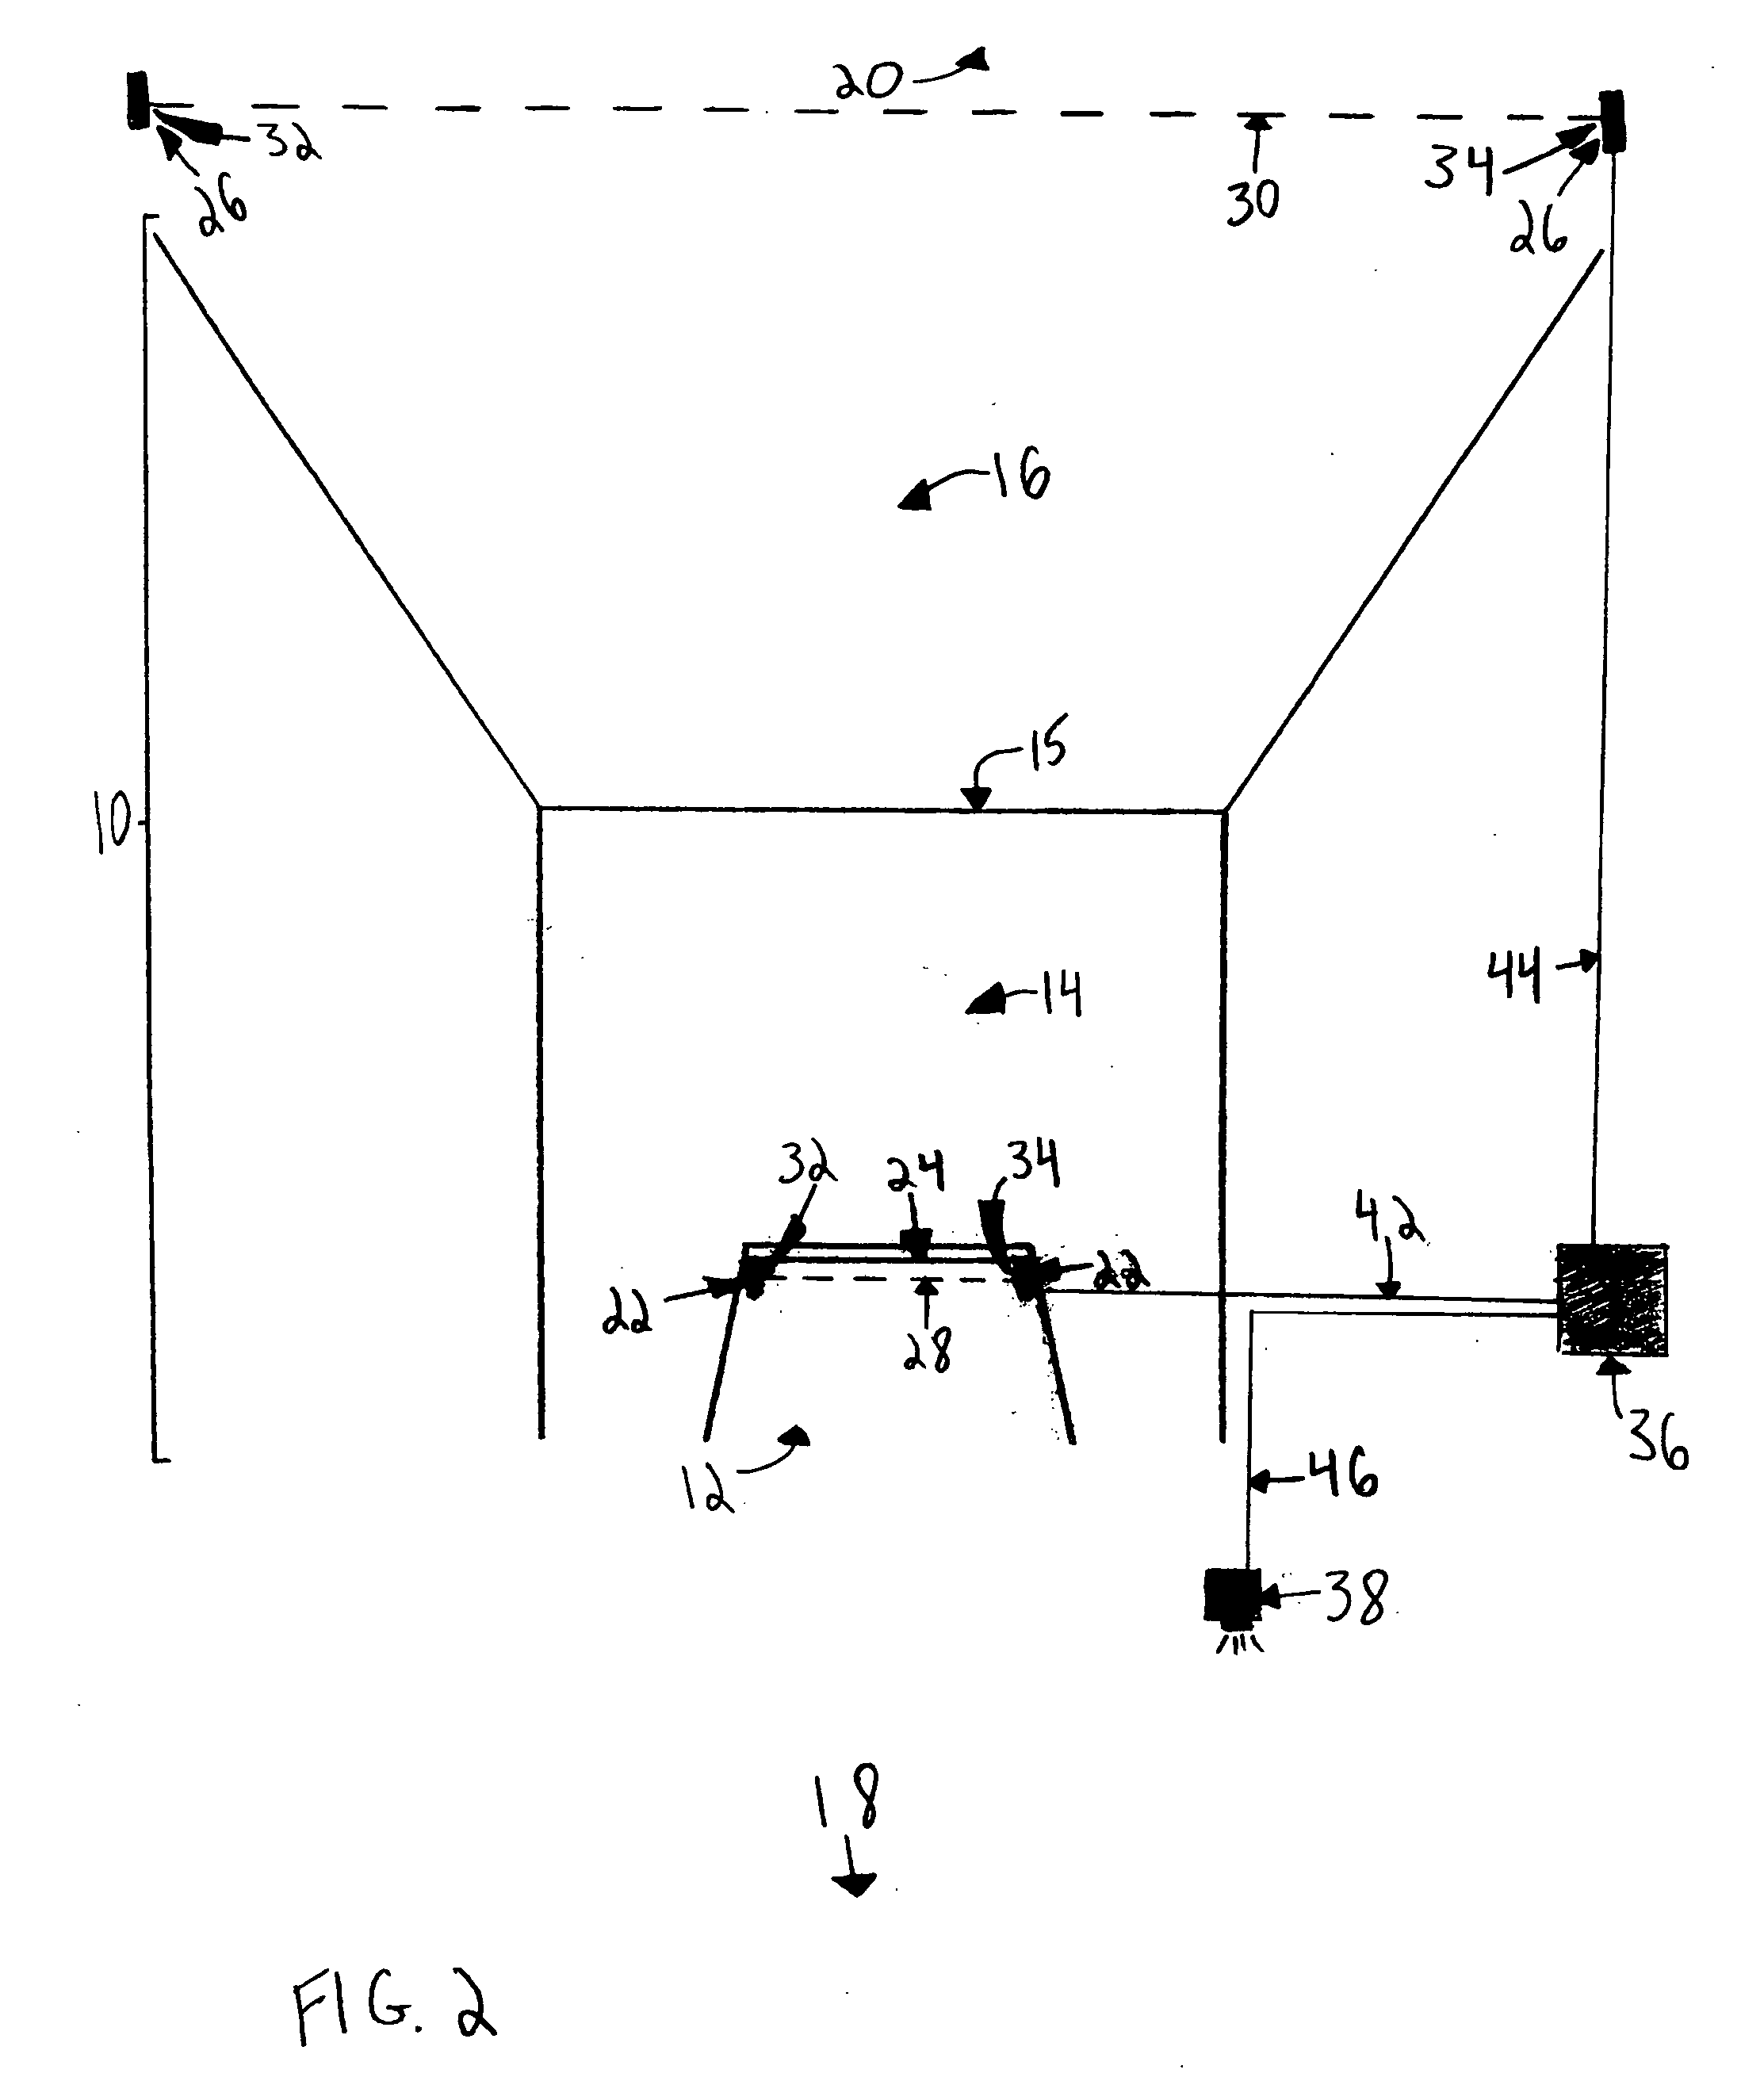 Apparatus and method for improving ski jump safety